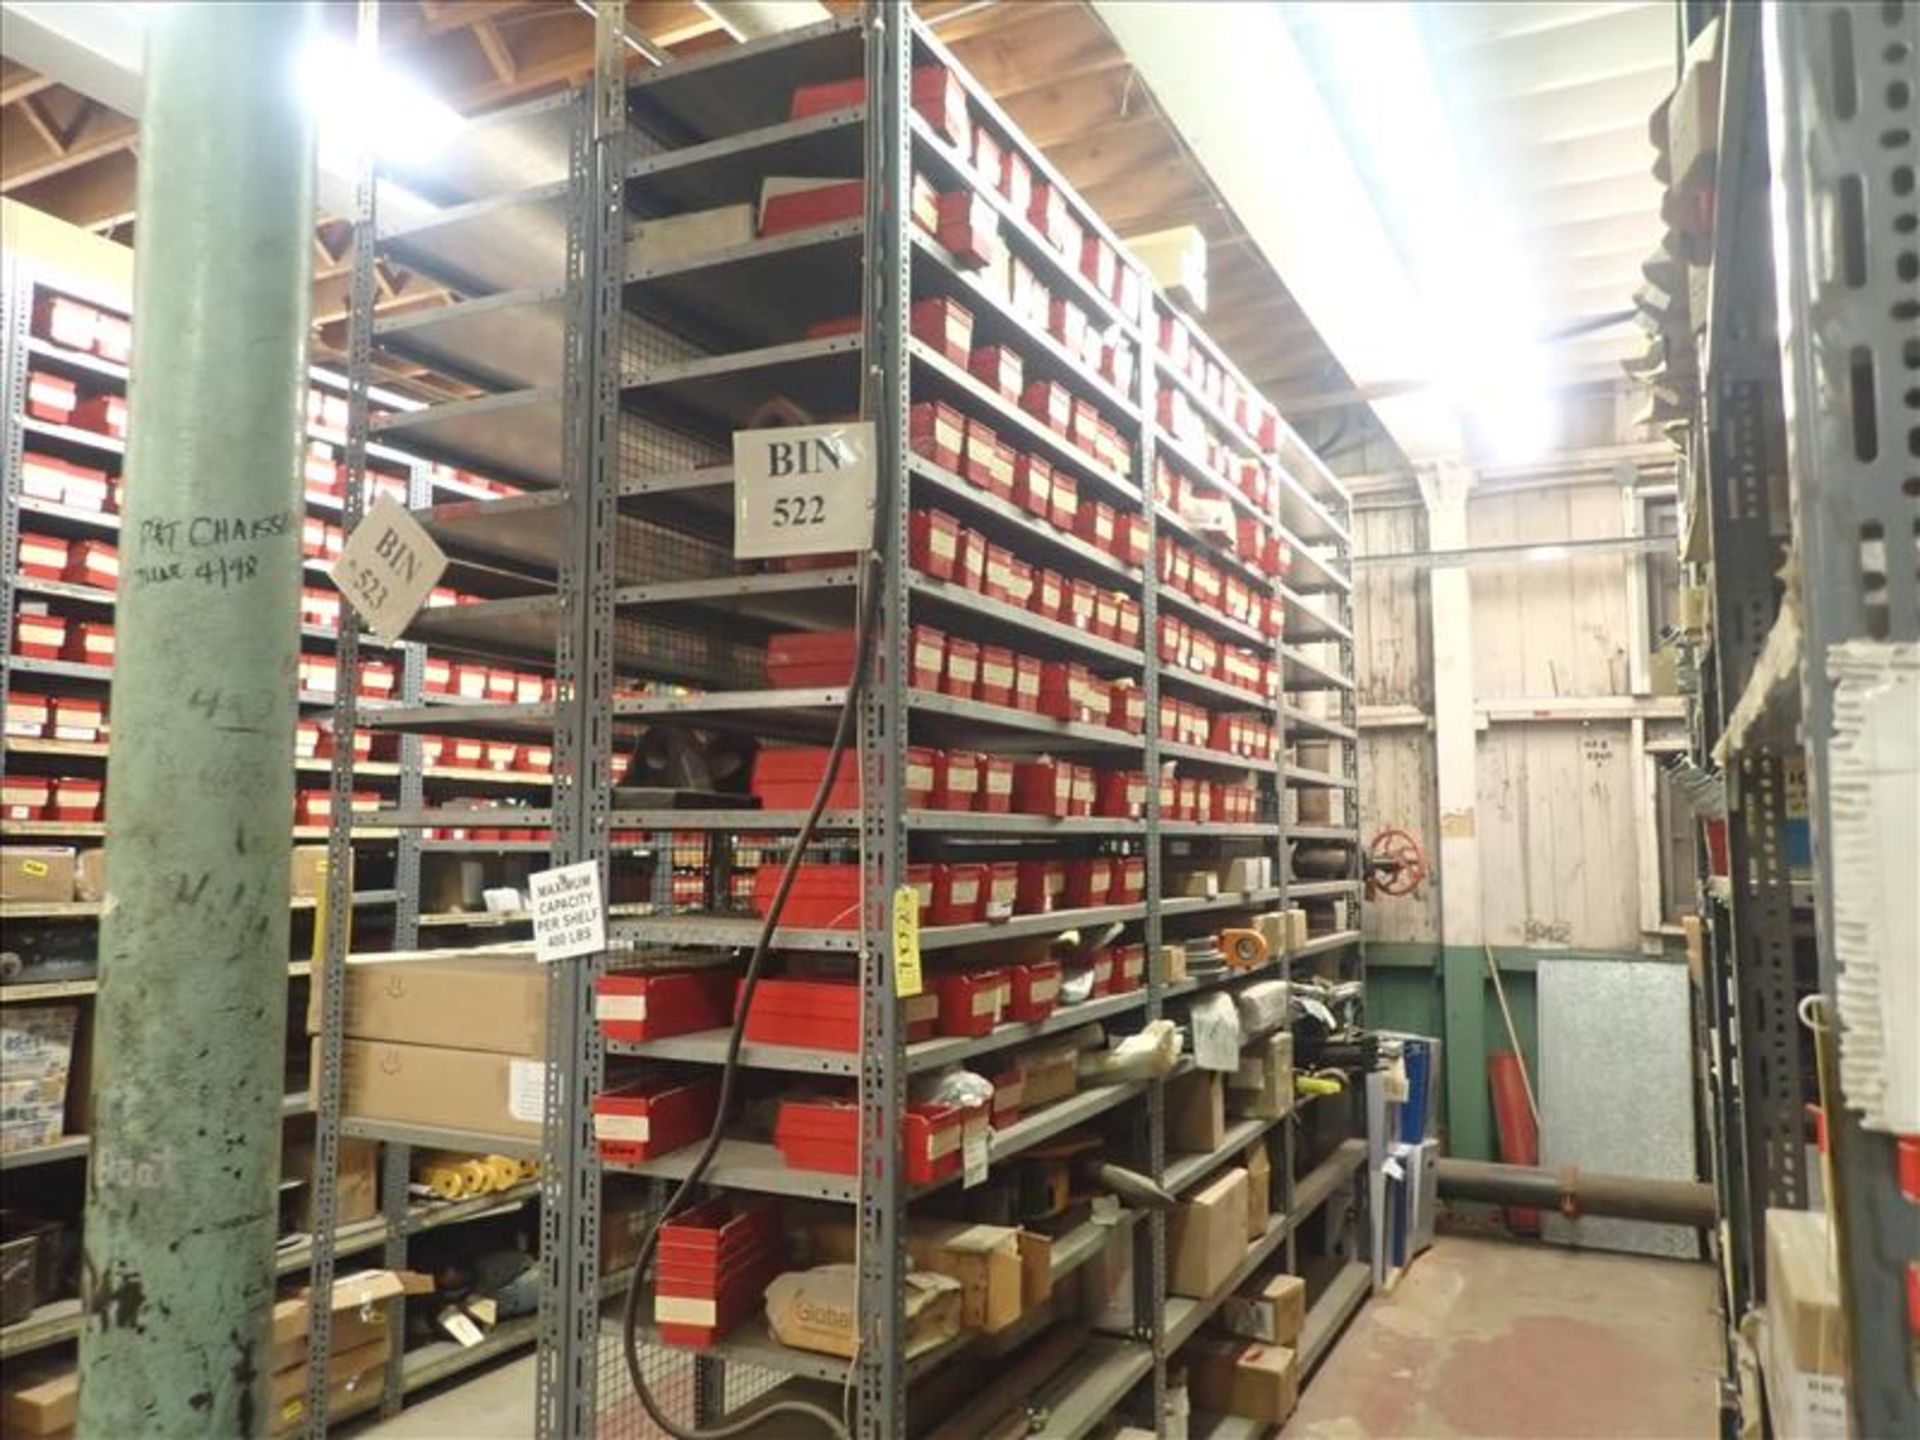 contents of shelving: couplings, cylinders, spare parts, etc. (Bin 522) (Tag 8017 Loc WH South)